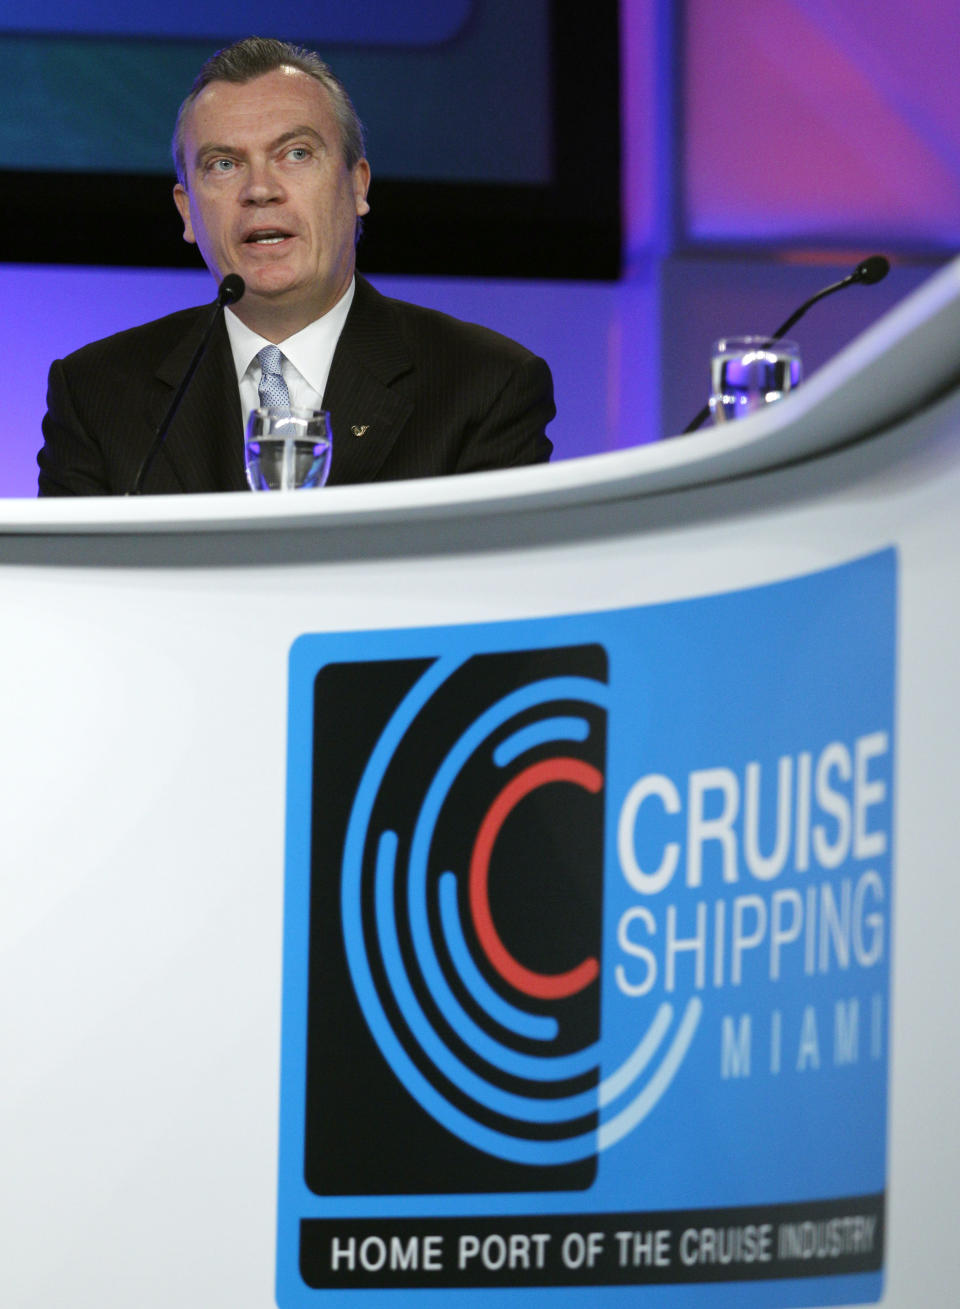 Stein Kruse, President and CEO of Holland America Line, speaks during a roundtable discussion on the state of the cruise ship industry at the Cruise Shipping Miami conference, Tuesday, March 13, 2012, in Miami Beach, Fla. (AP Photo/Lynne Sladky)